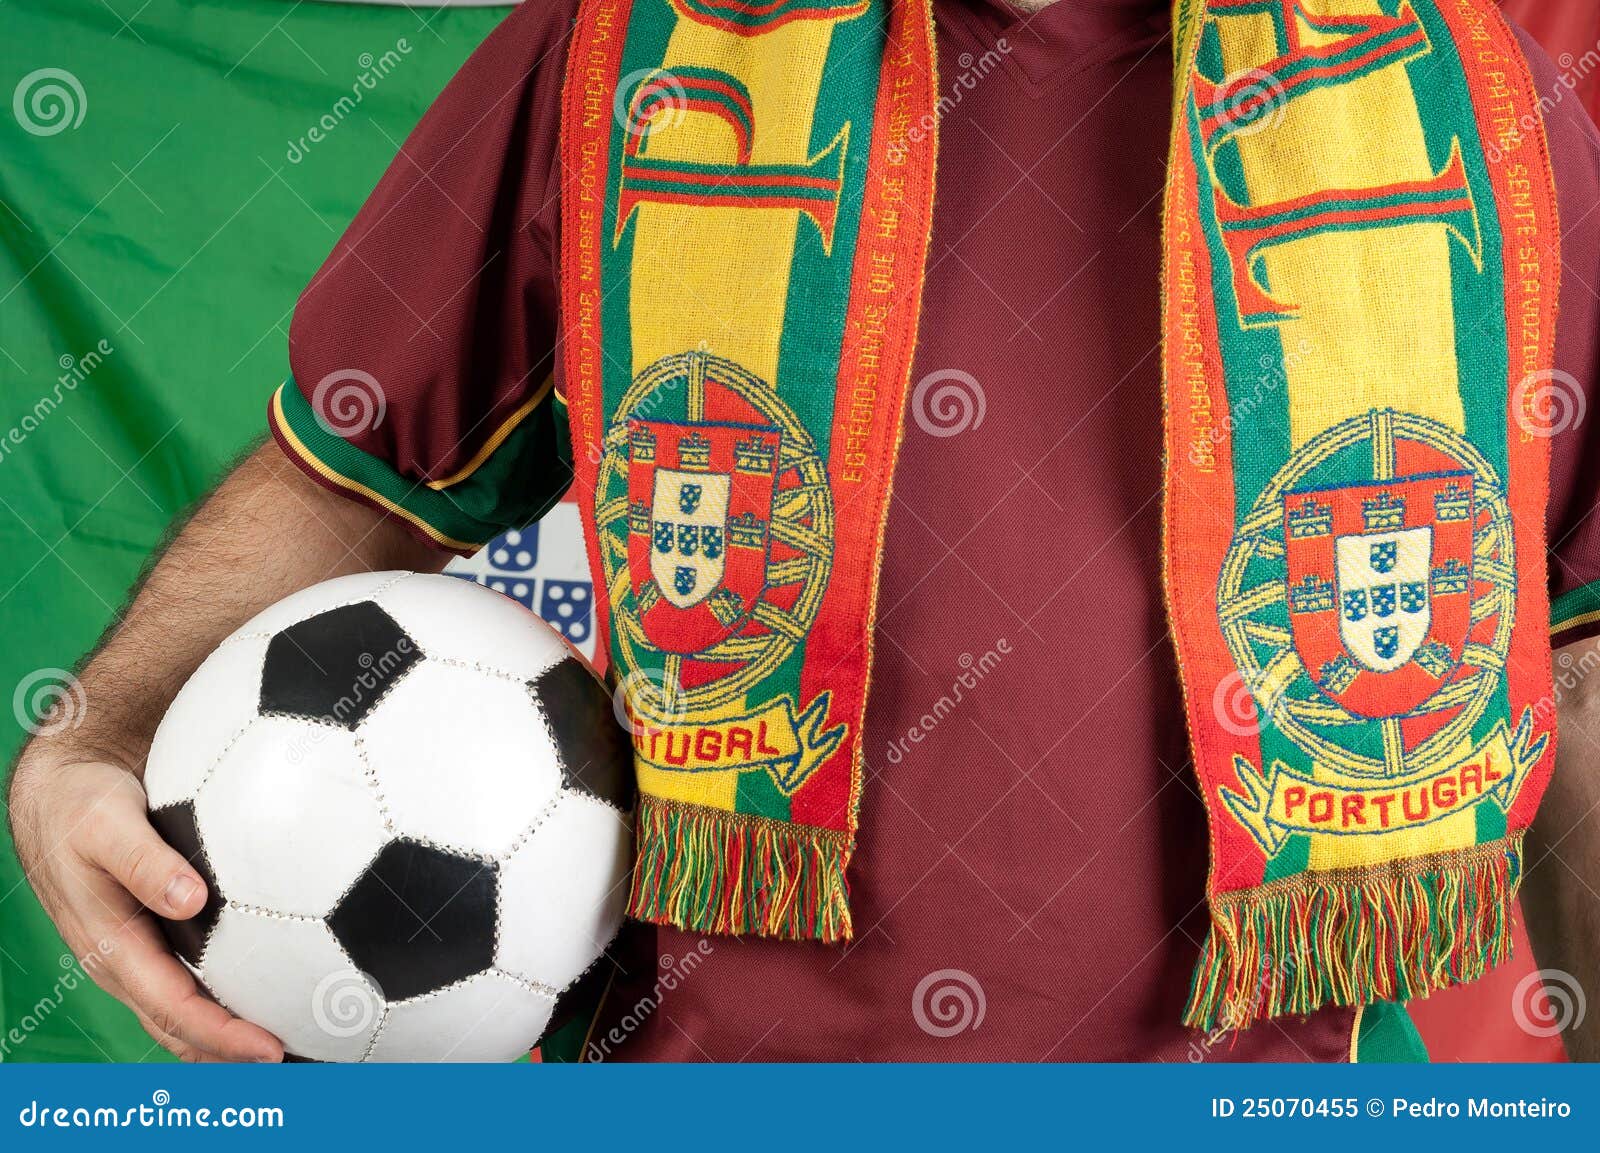 Portugal soccer fan stock image. Image of clenched, portuguese - 25070455